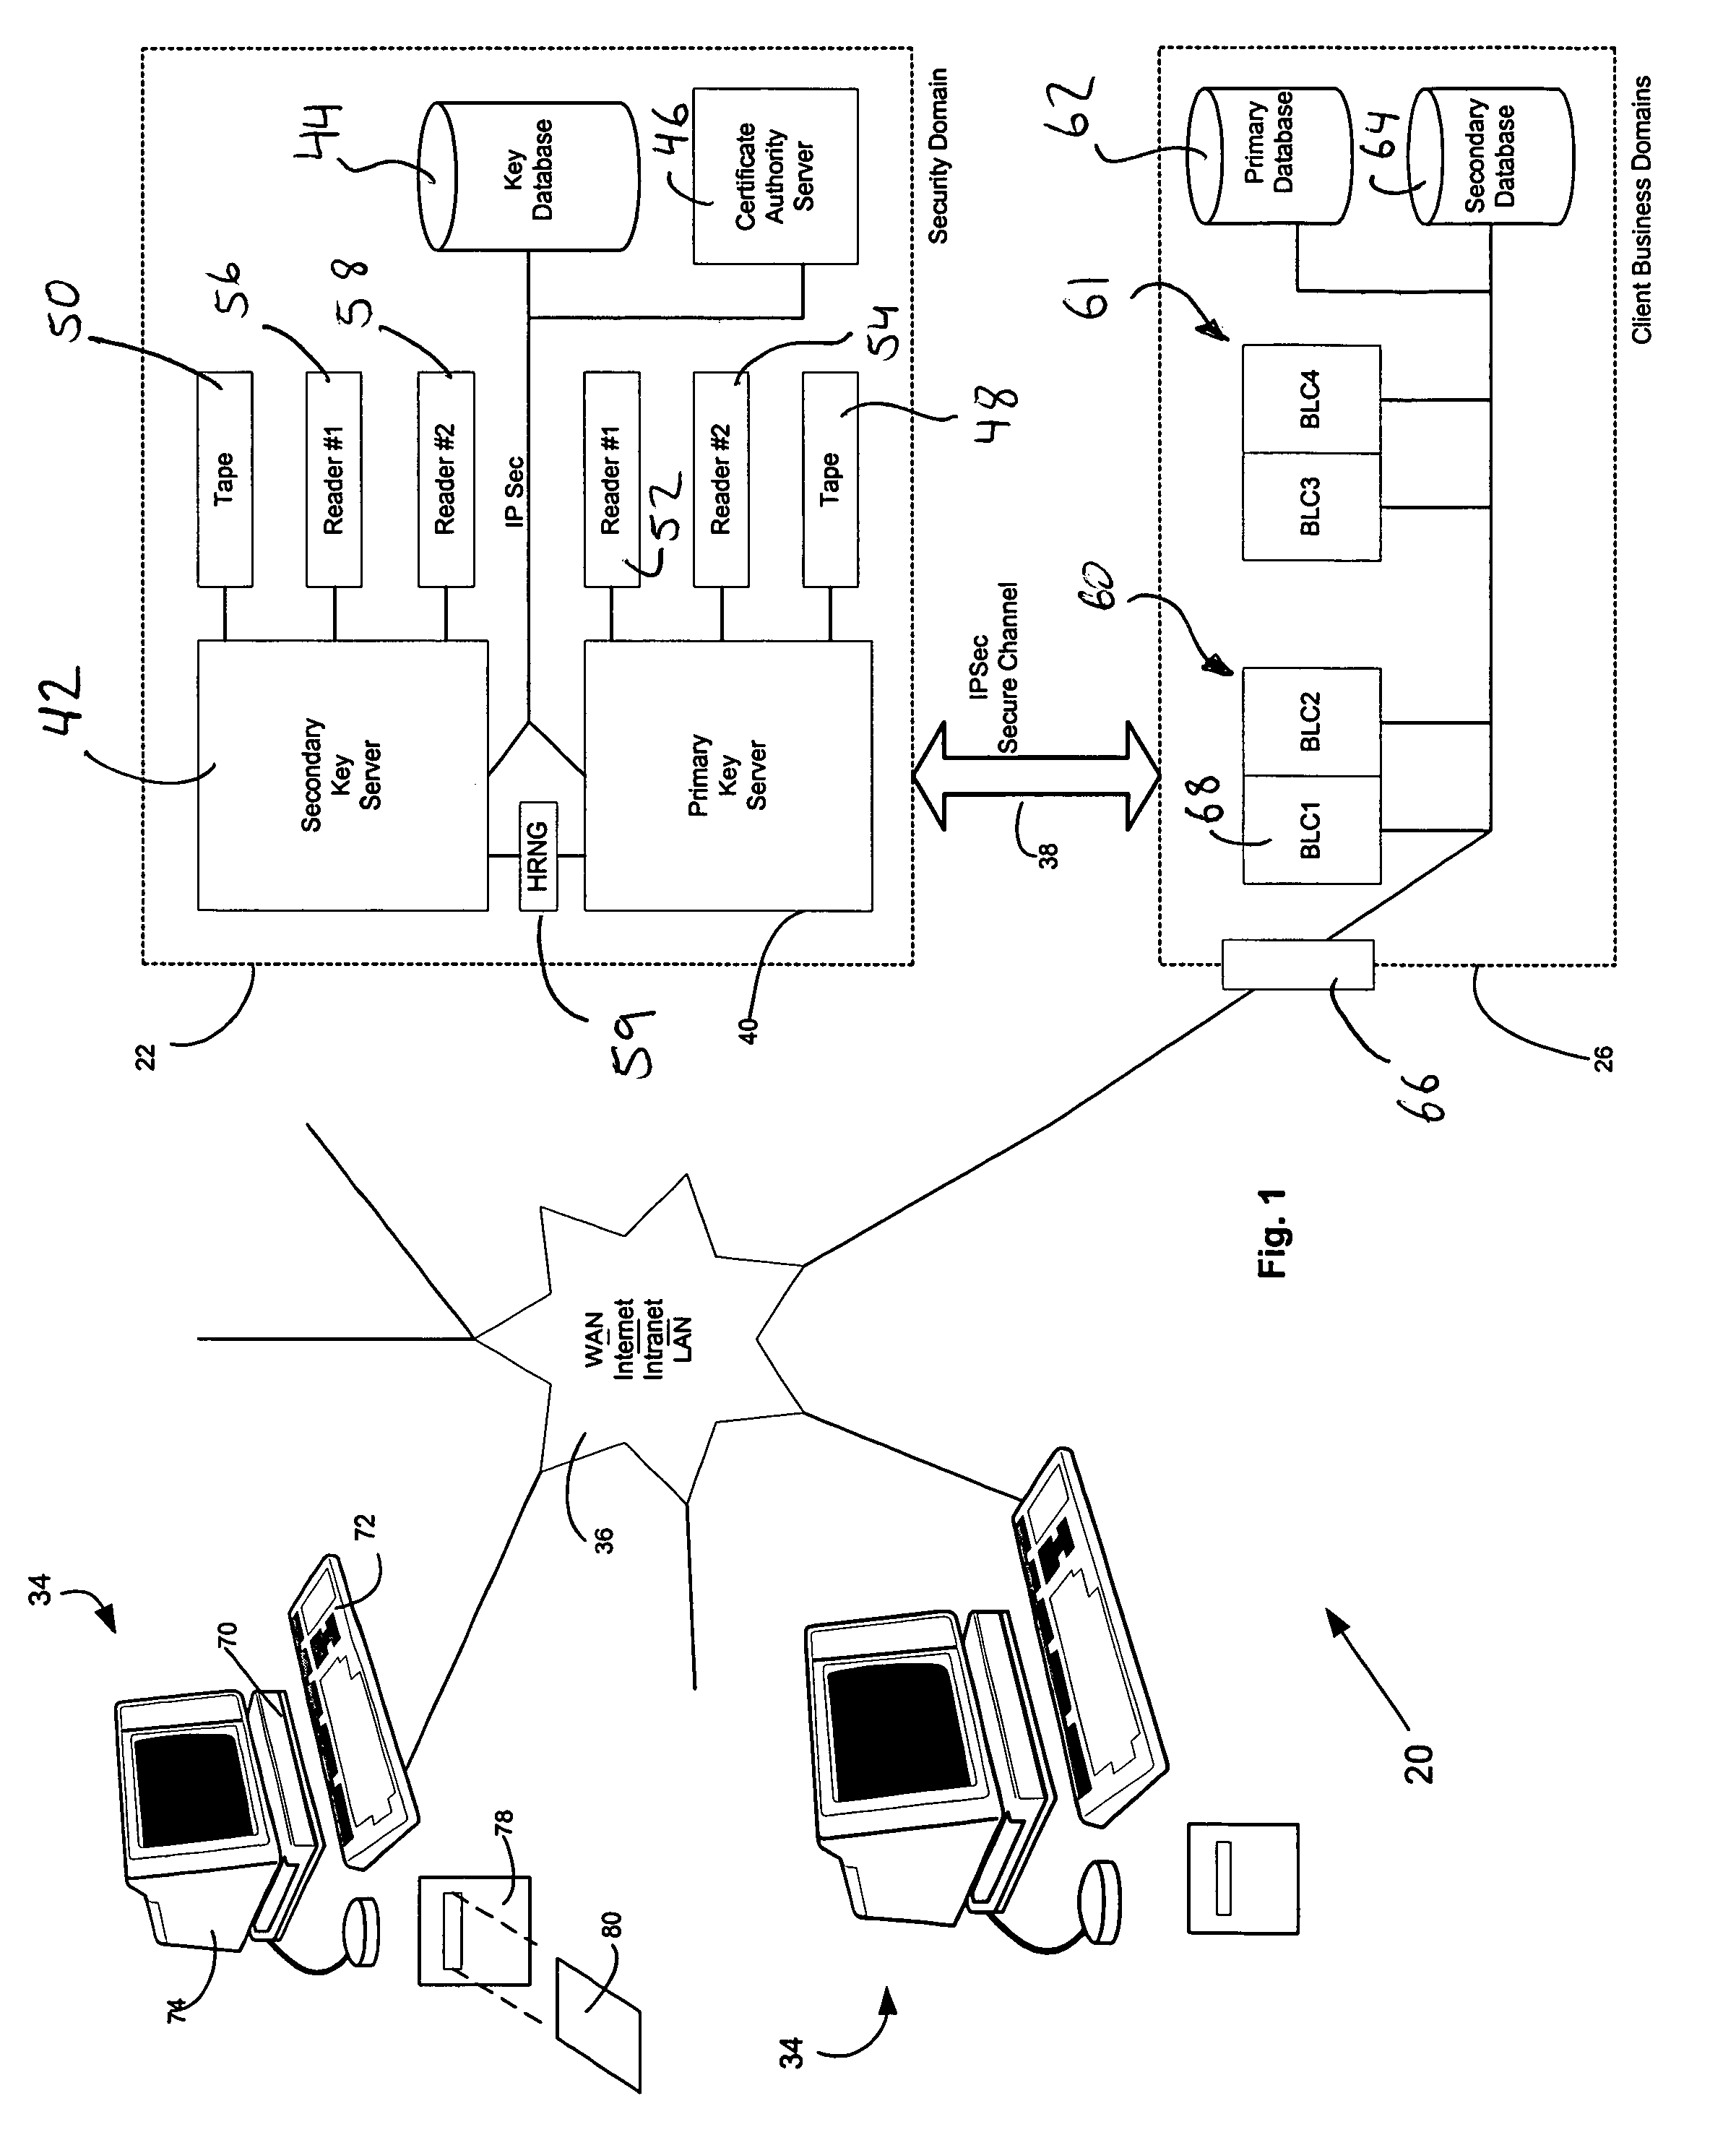 Hidden link dynamic key manager for use in computer systems with database structure for storage of encrypted data and method for storage and retrieval of encrypted data